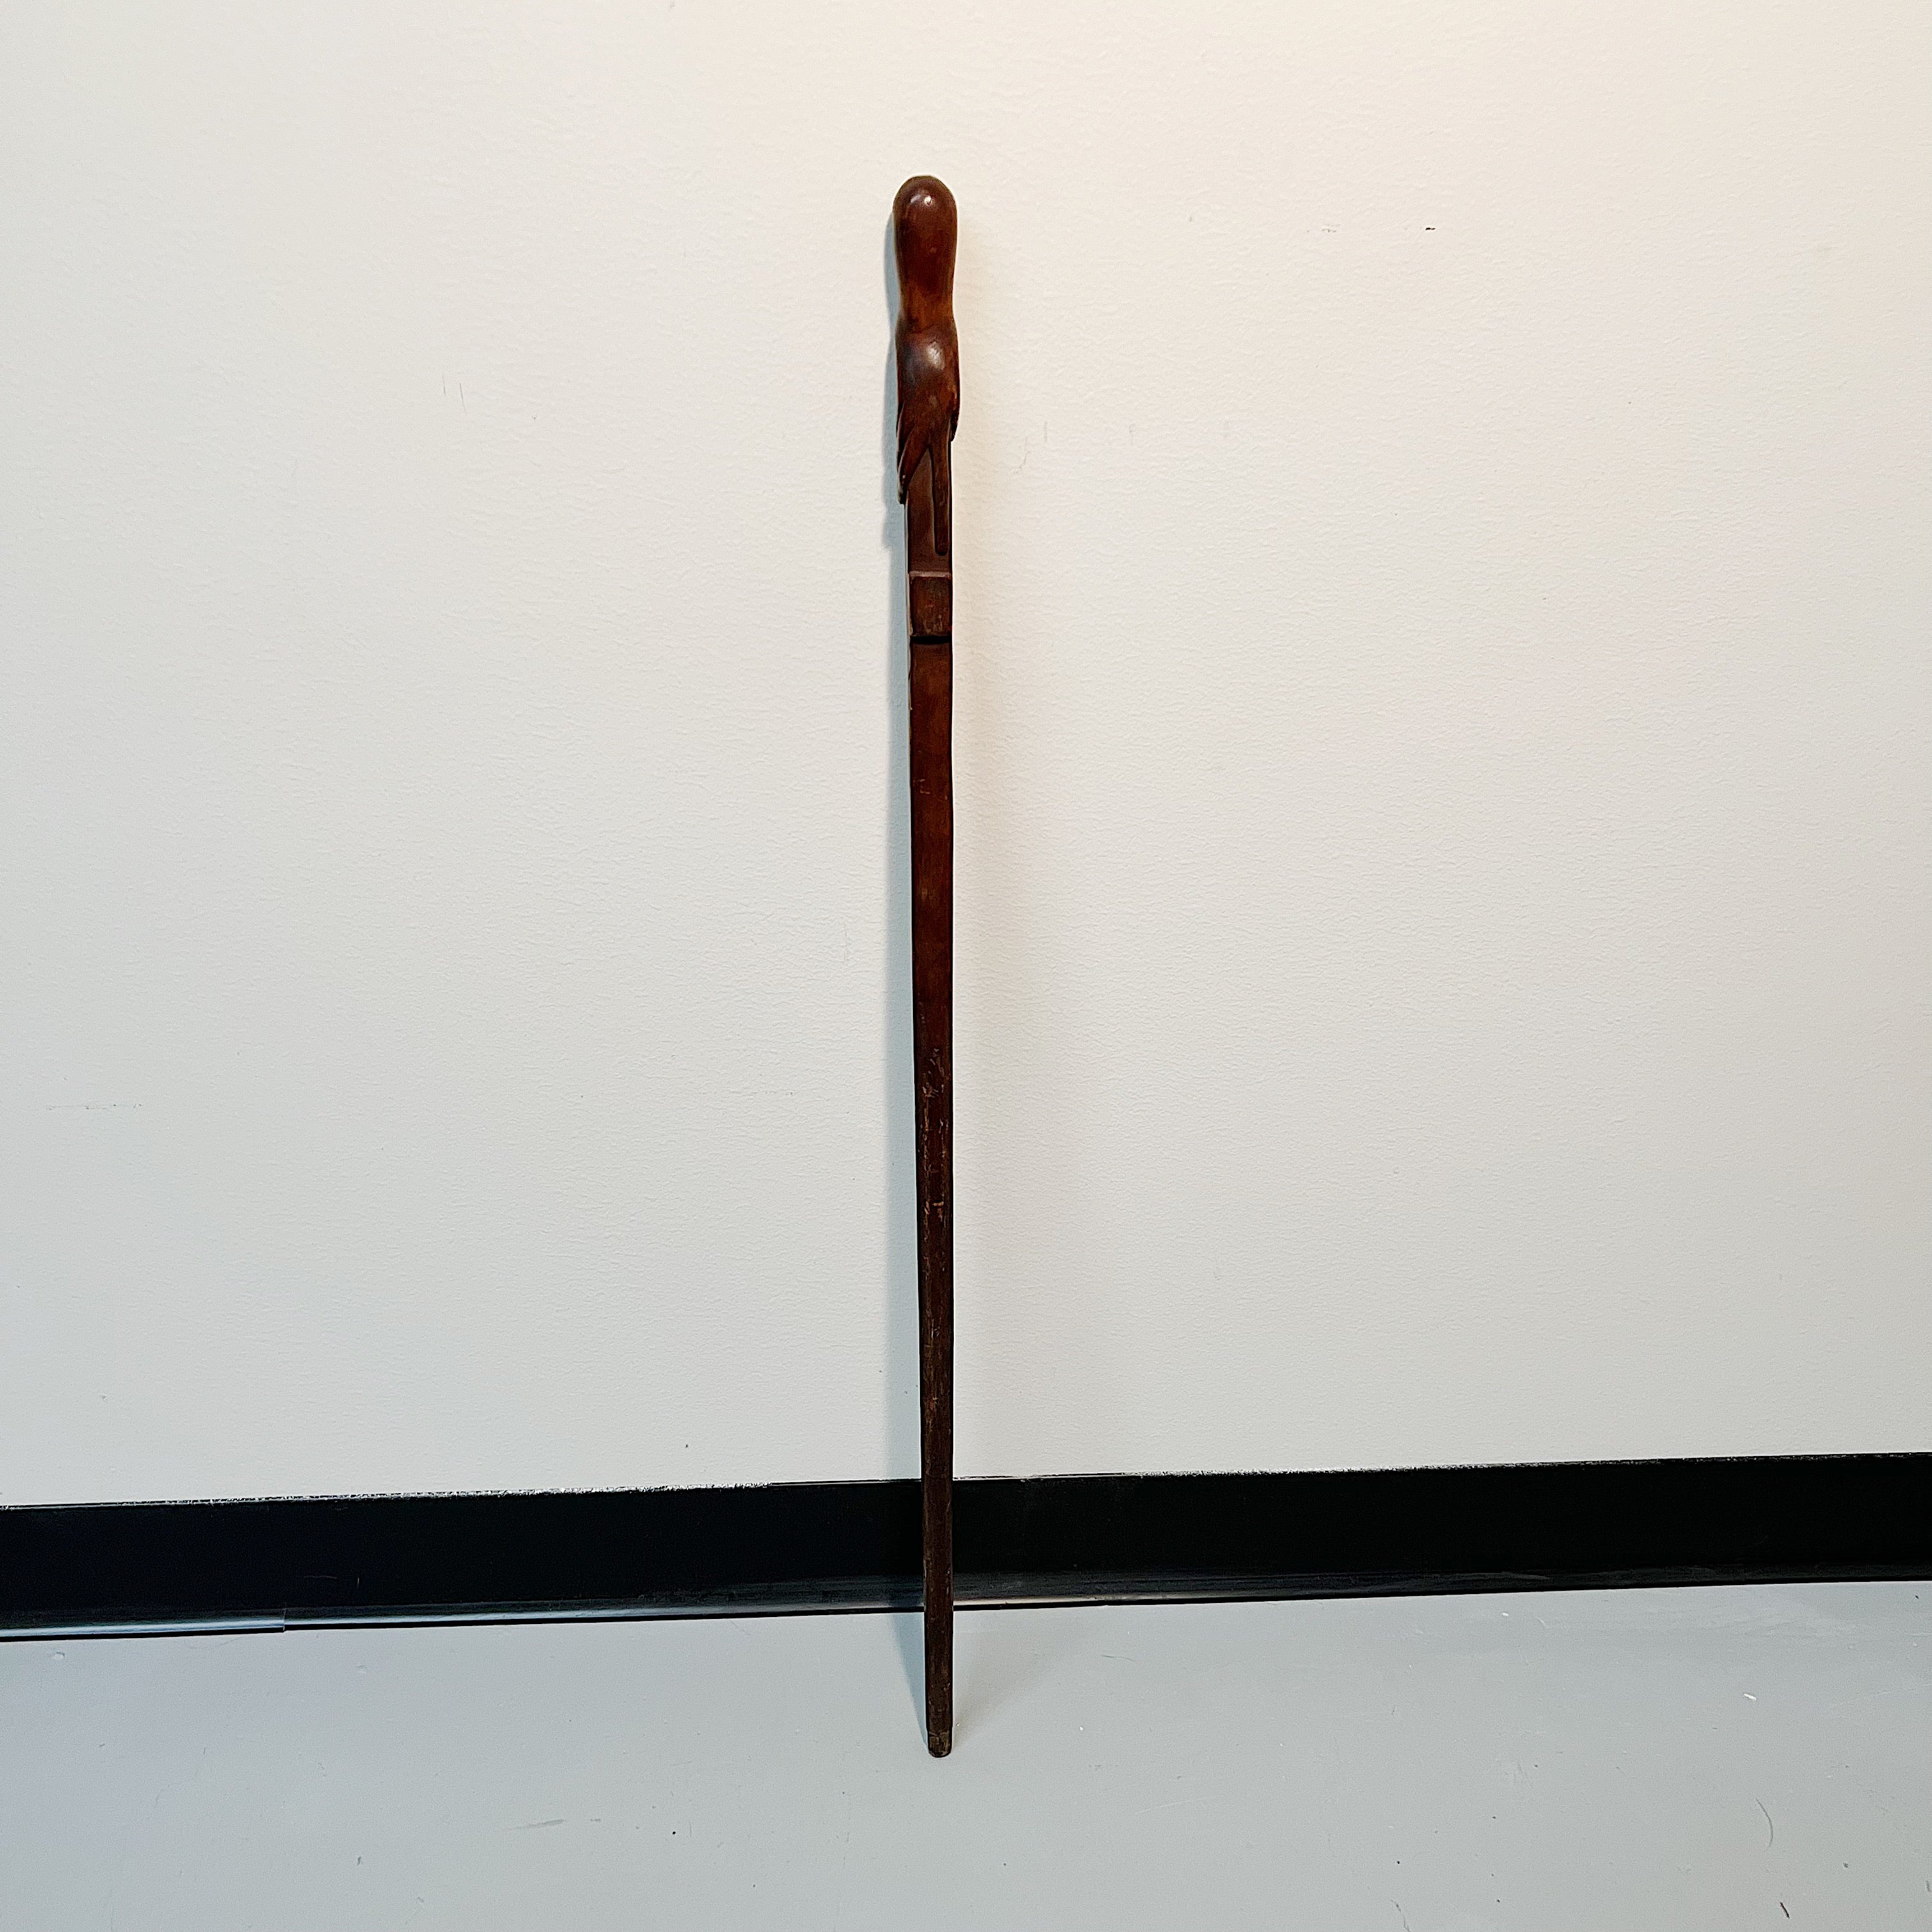 Rare Antique Folk Art Walking Cane of Carved Hand Grasping the Stick - Unusual Elongated Finger - Rare Turn of the Century Wood Carving